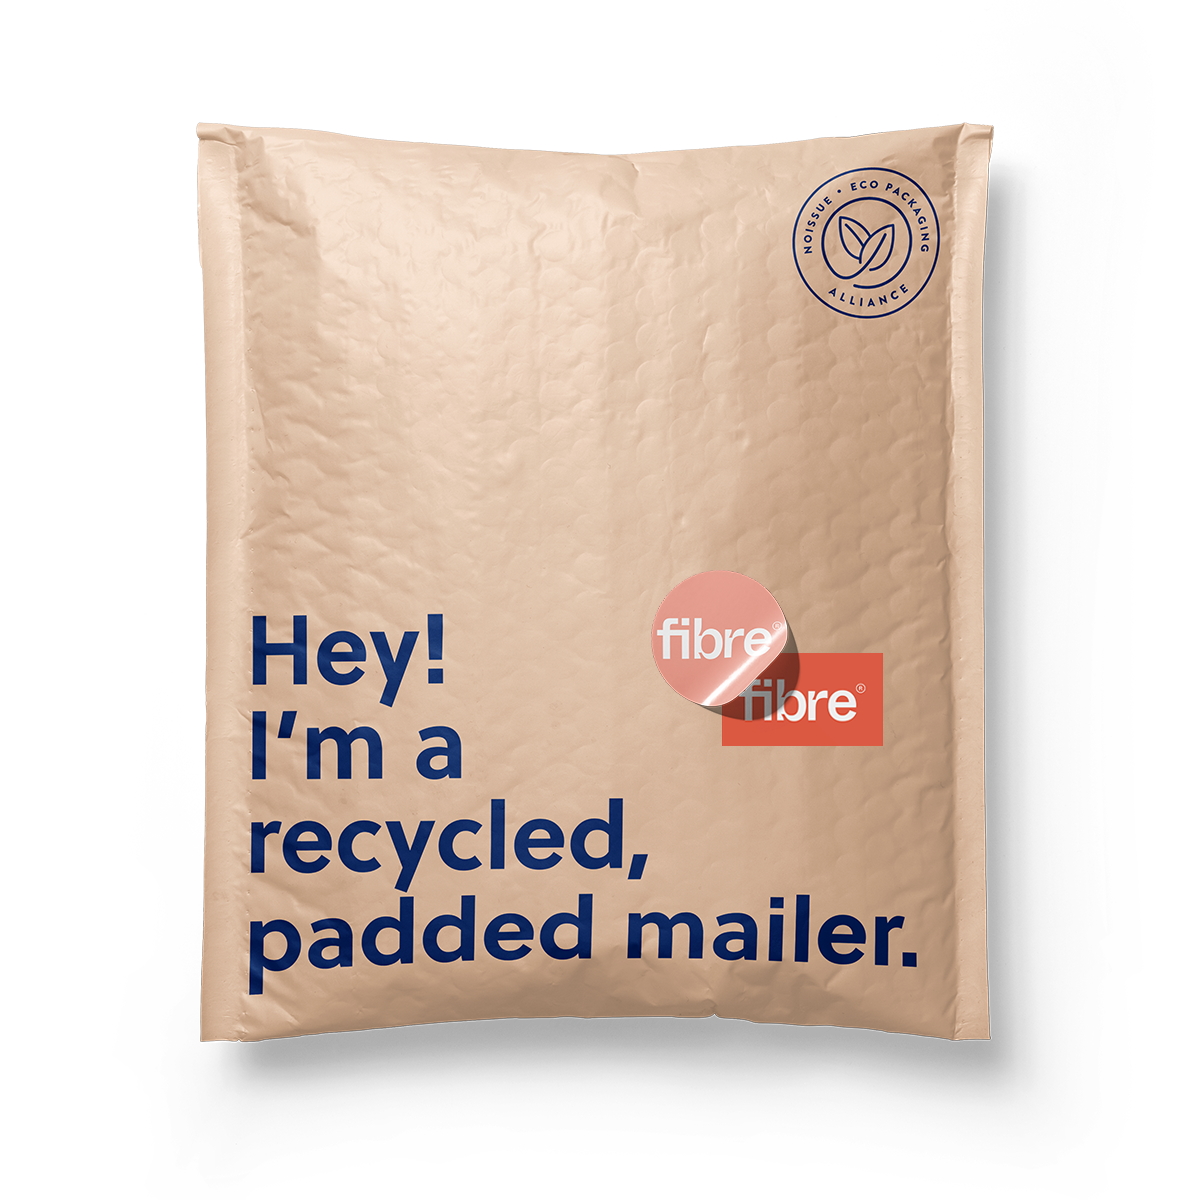 How To Label A Bubble Mailer | lupon.gov.ph